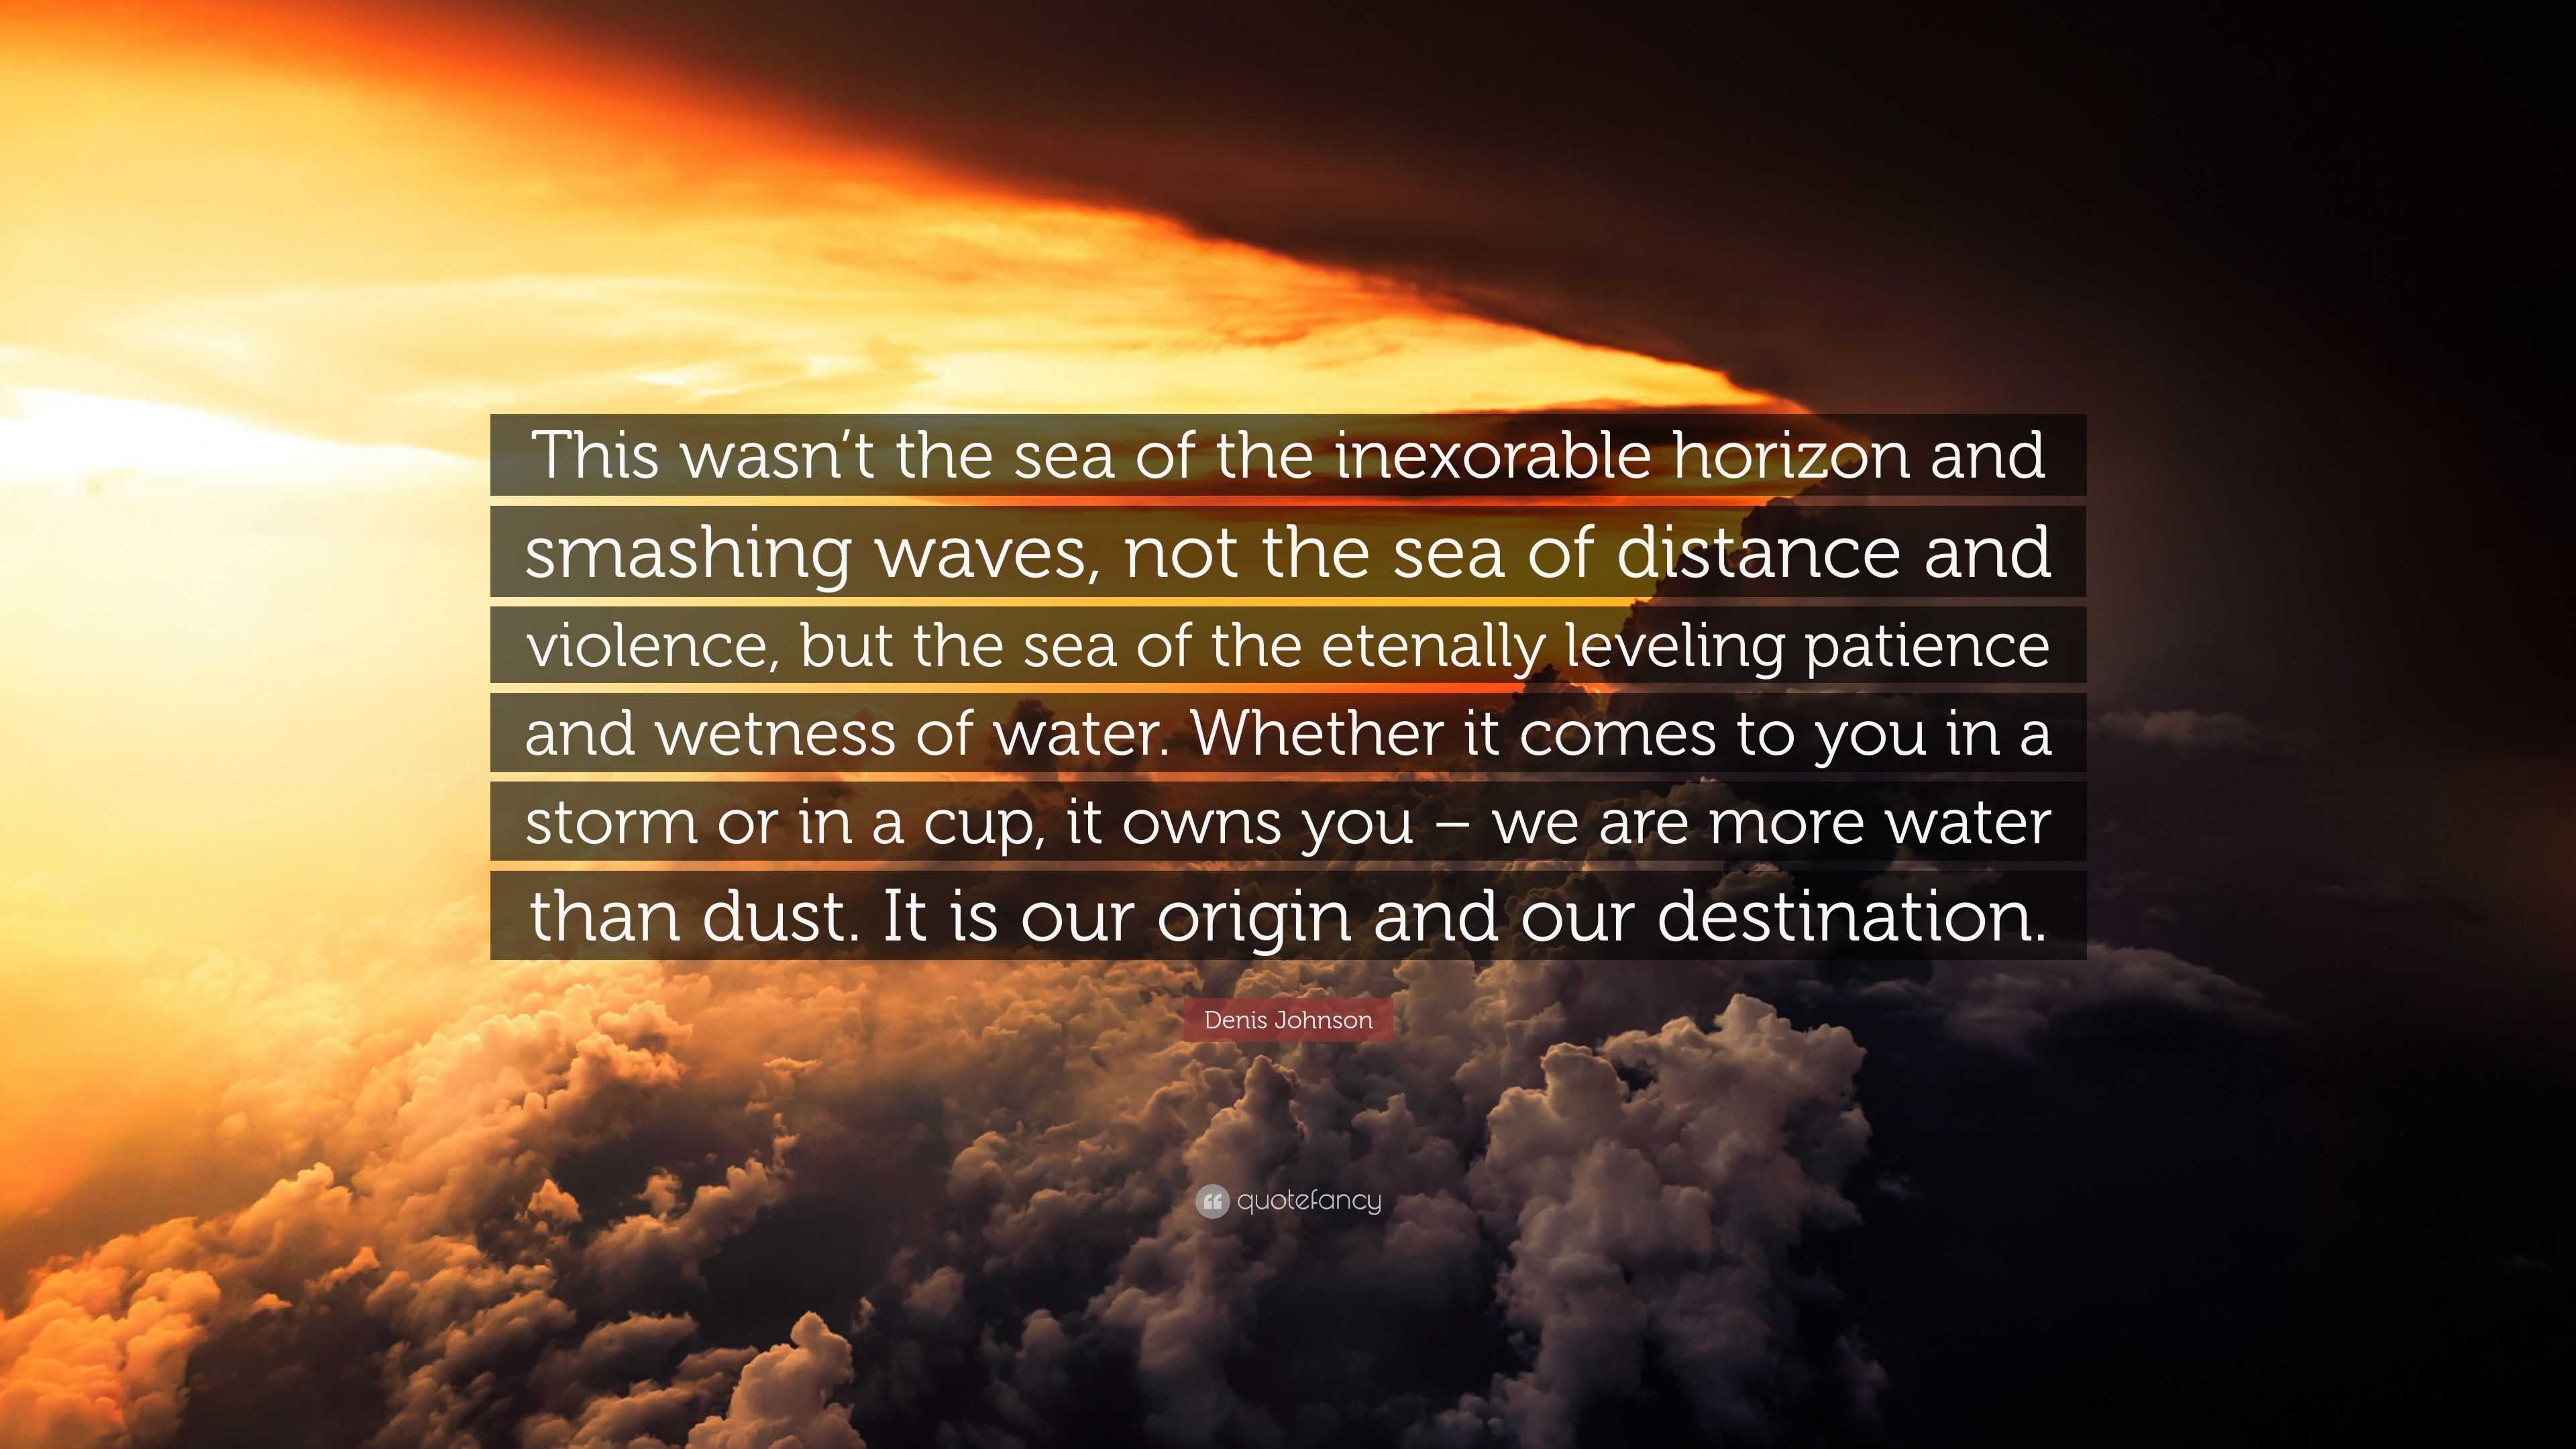 Denis Johnson Quote: "This wasn't the sea of the ...